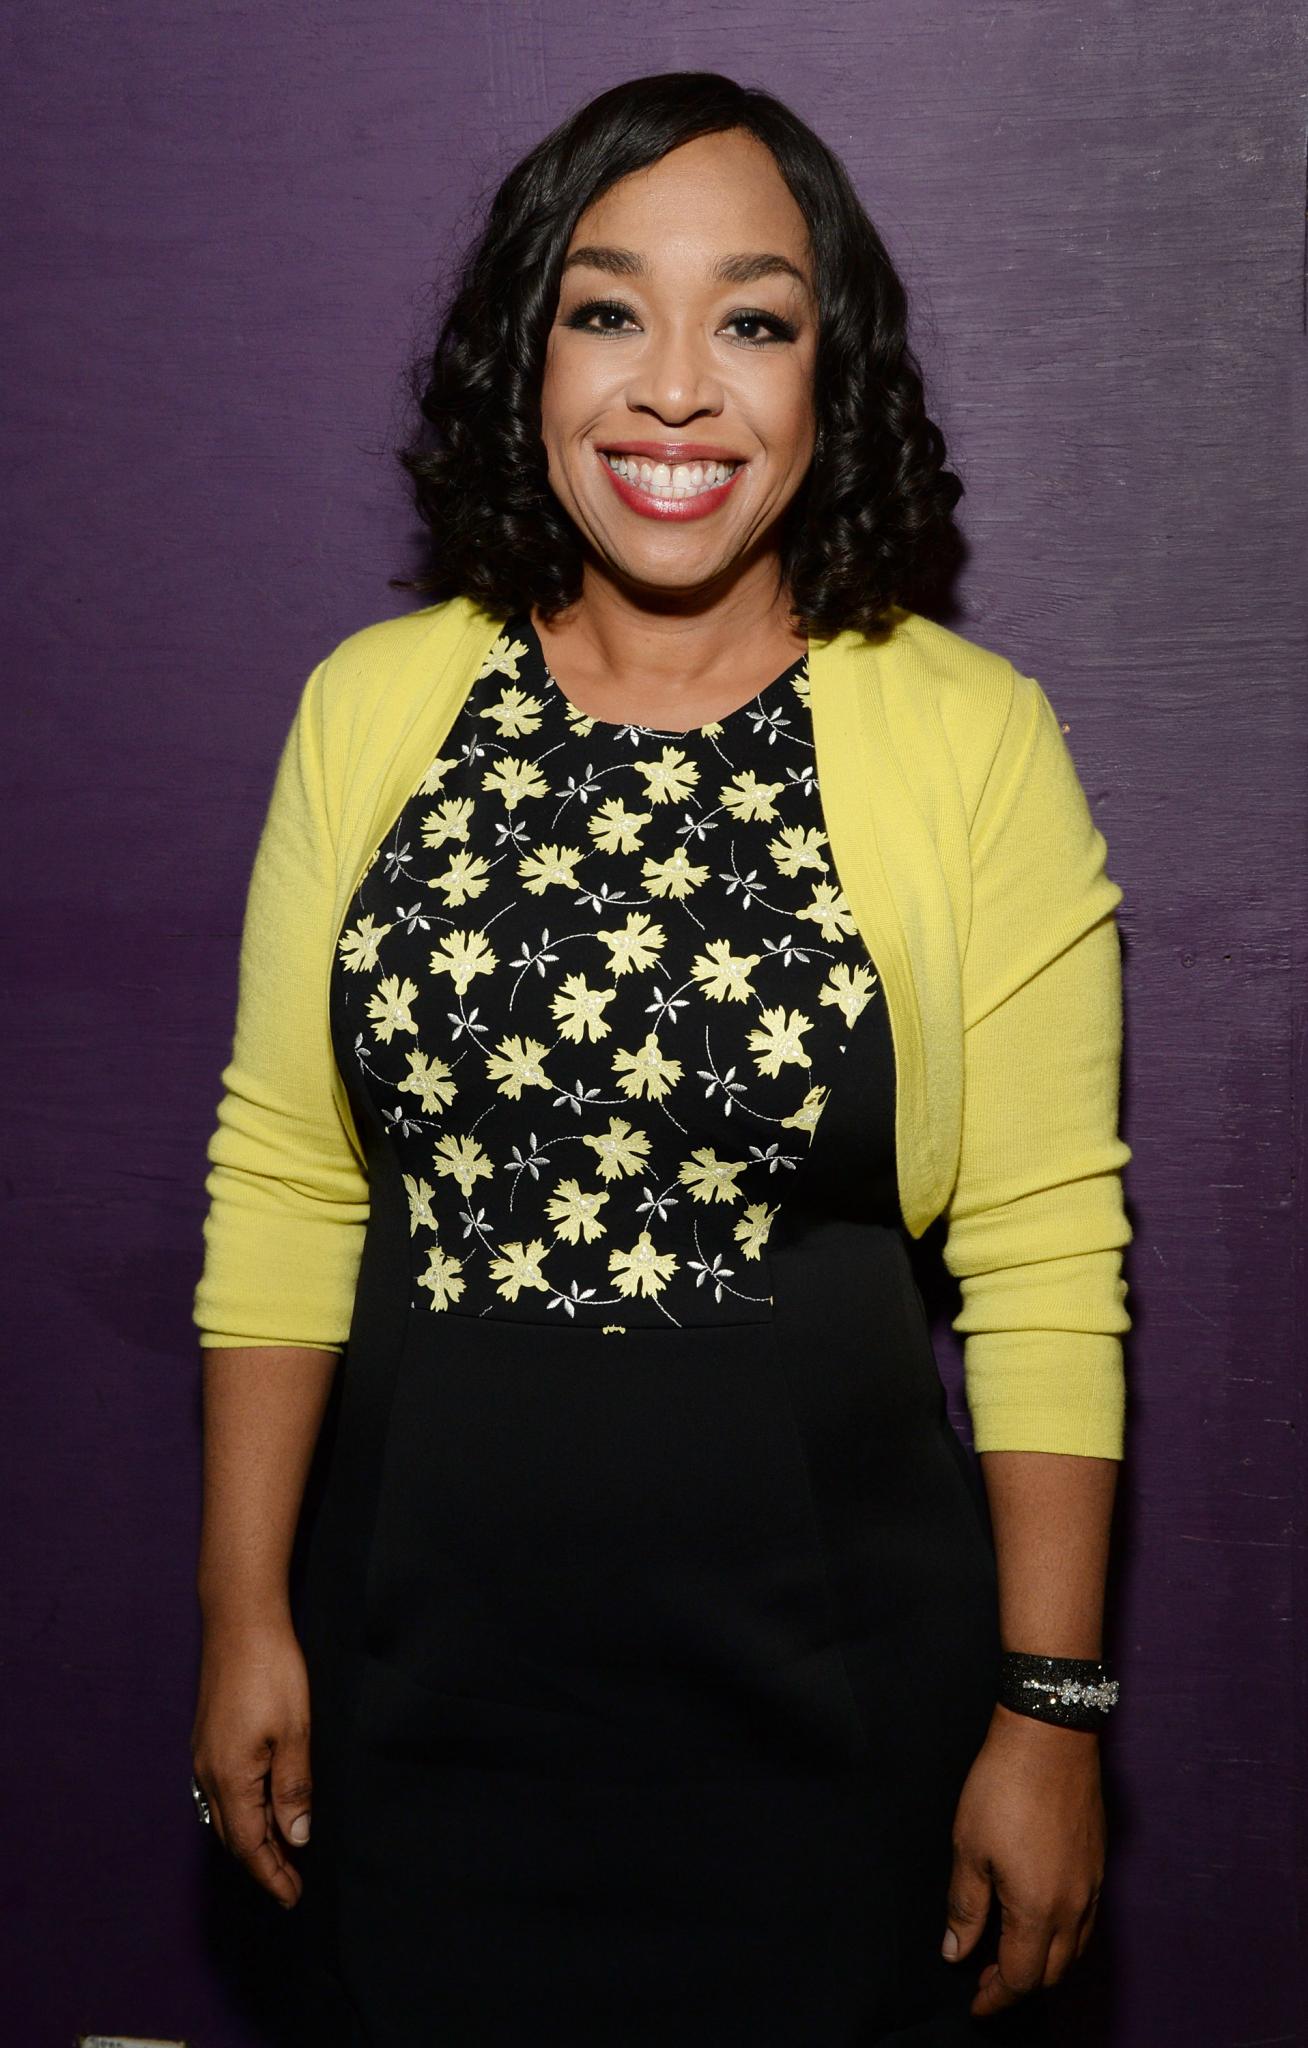 EXCLUSIVE: Why Shonda Rhimes Says She Wasn’t Interested in the #OscarssoWhite Debate